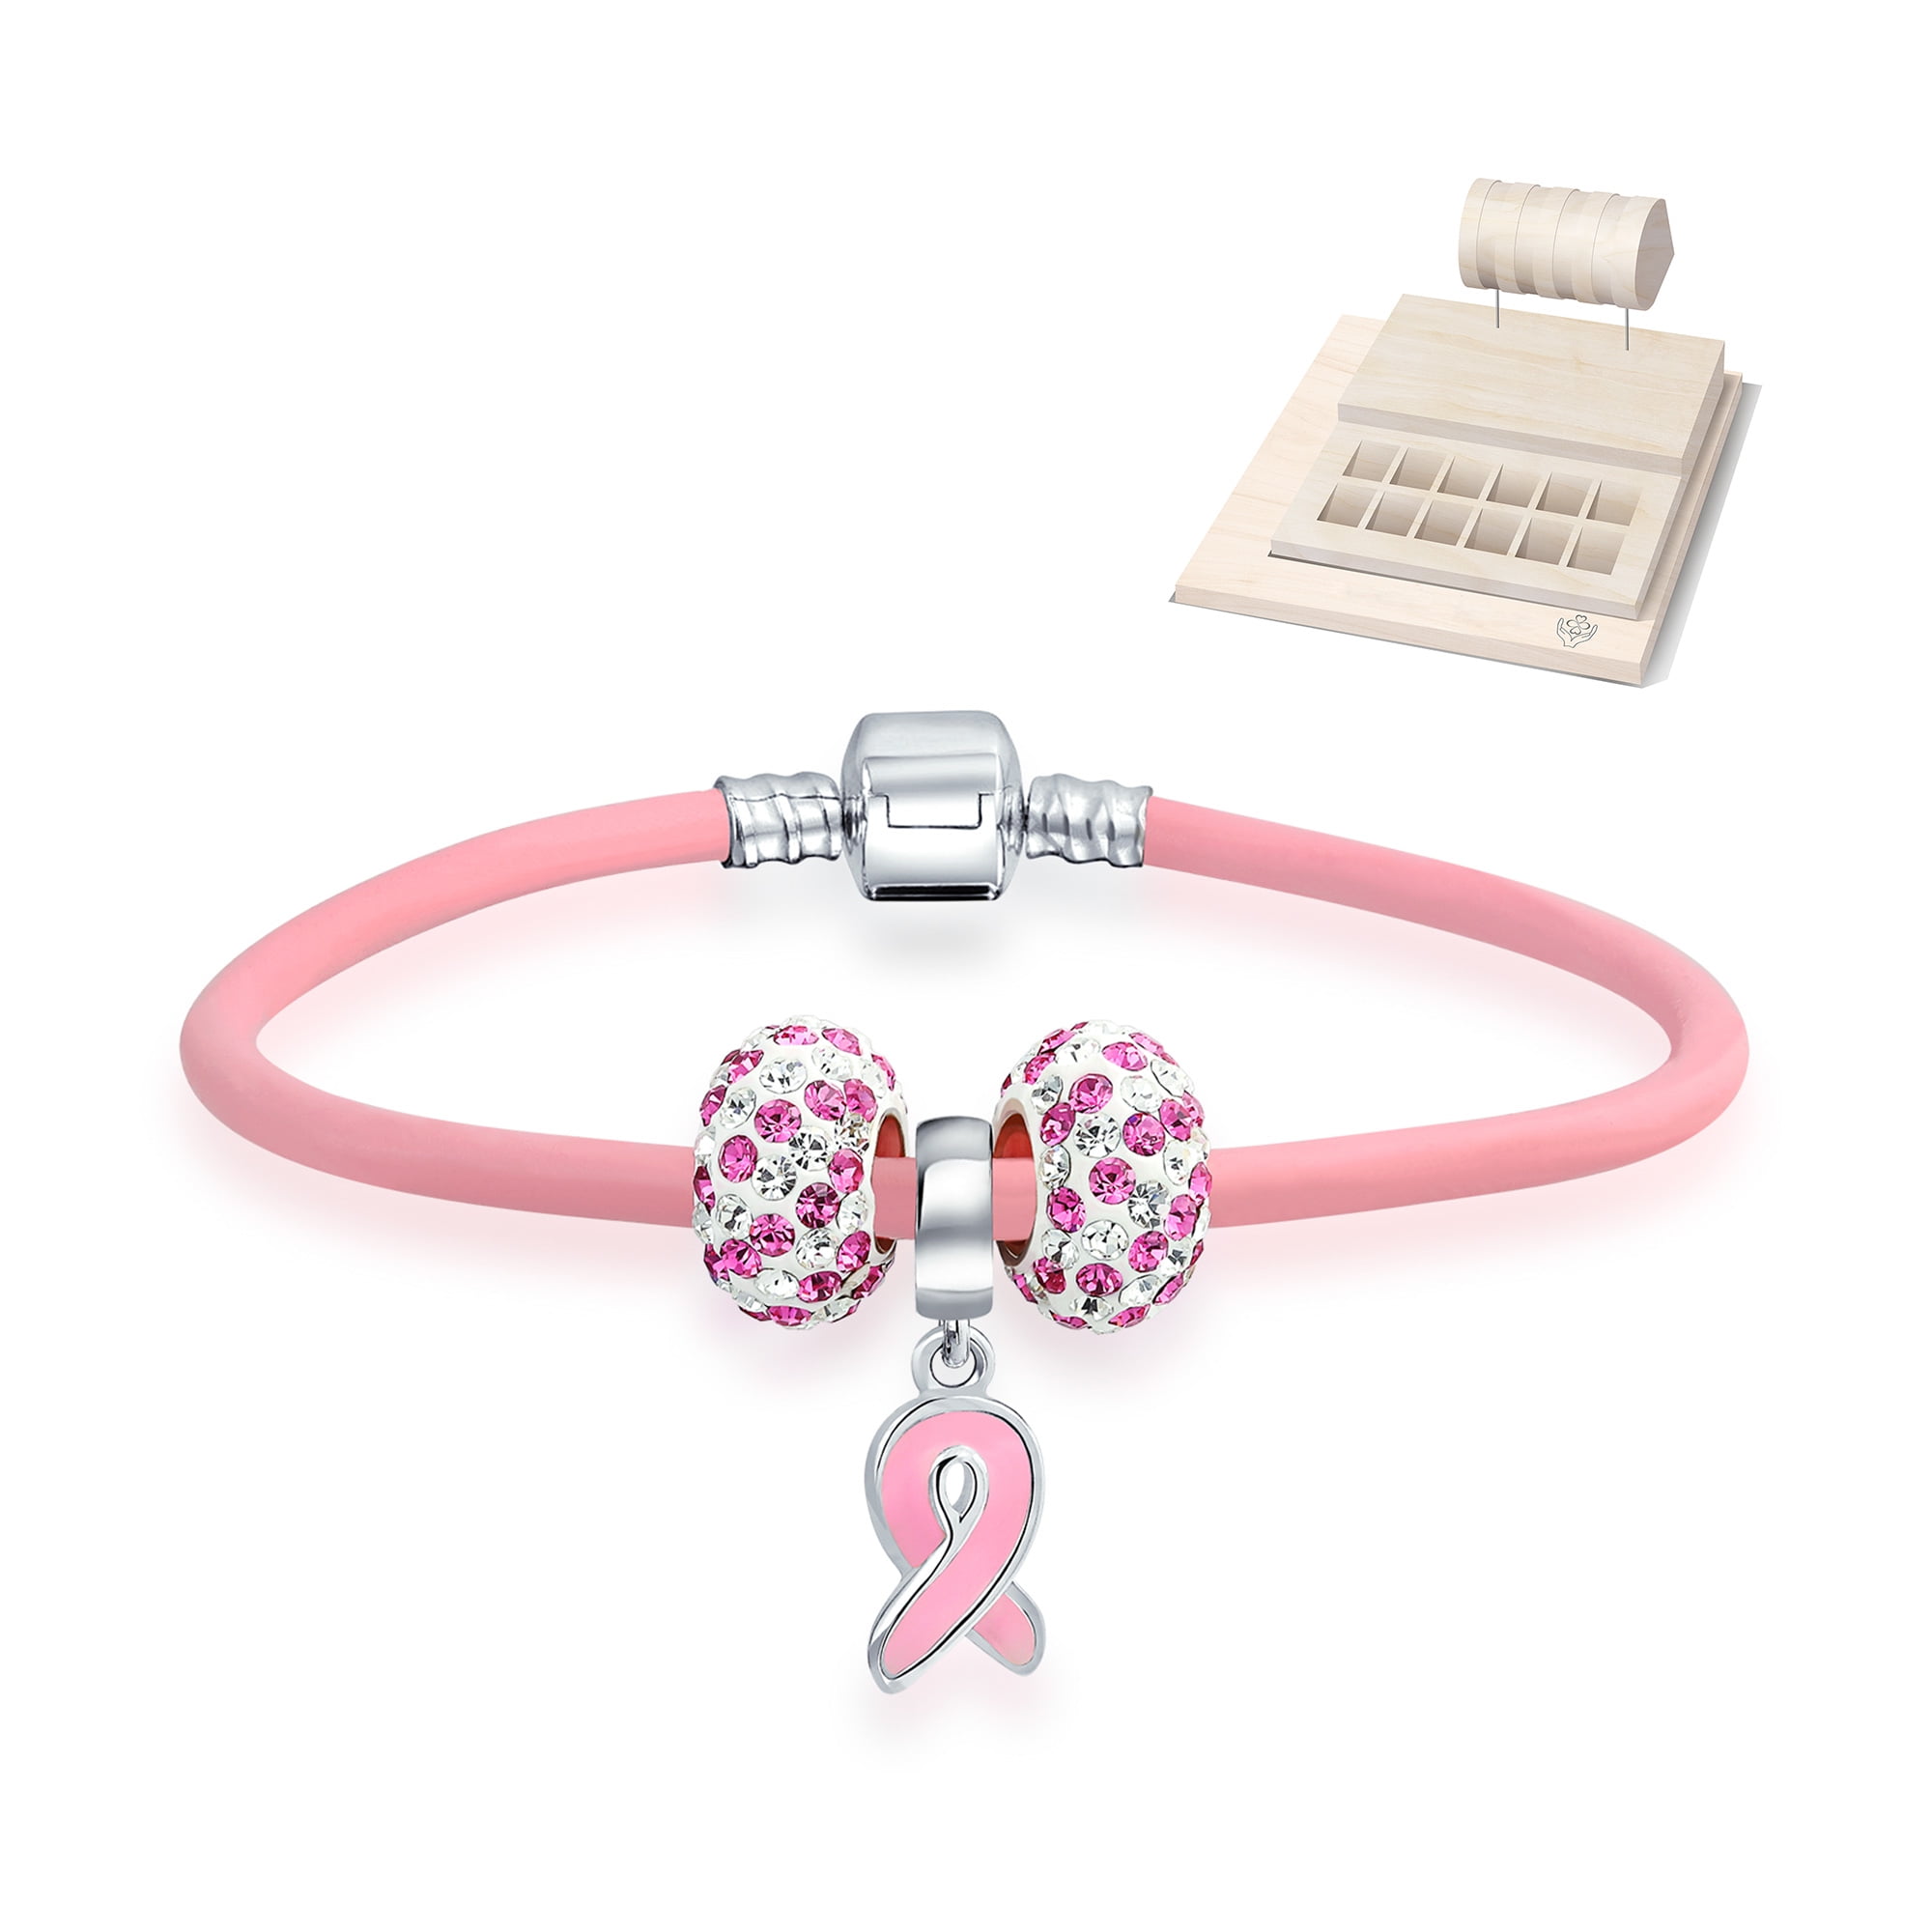 Support Breast Cancer Survivor Crystal Pink Ribbon Multi European Bead Charm  Genuine Pink Leather Bracelet for Women 925 Sterling Silver Barrel Clasp  7.5 Inch With Wood Charm Display - Walmart.com